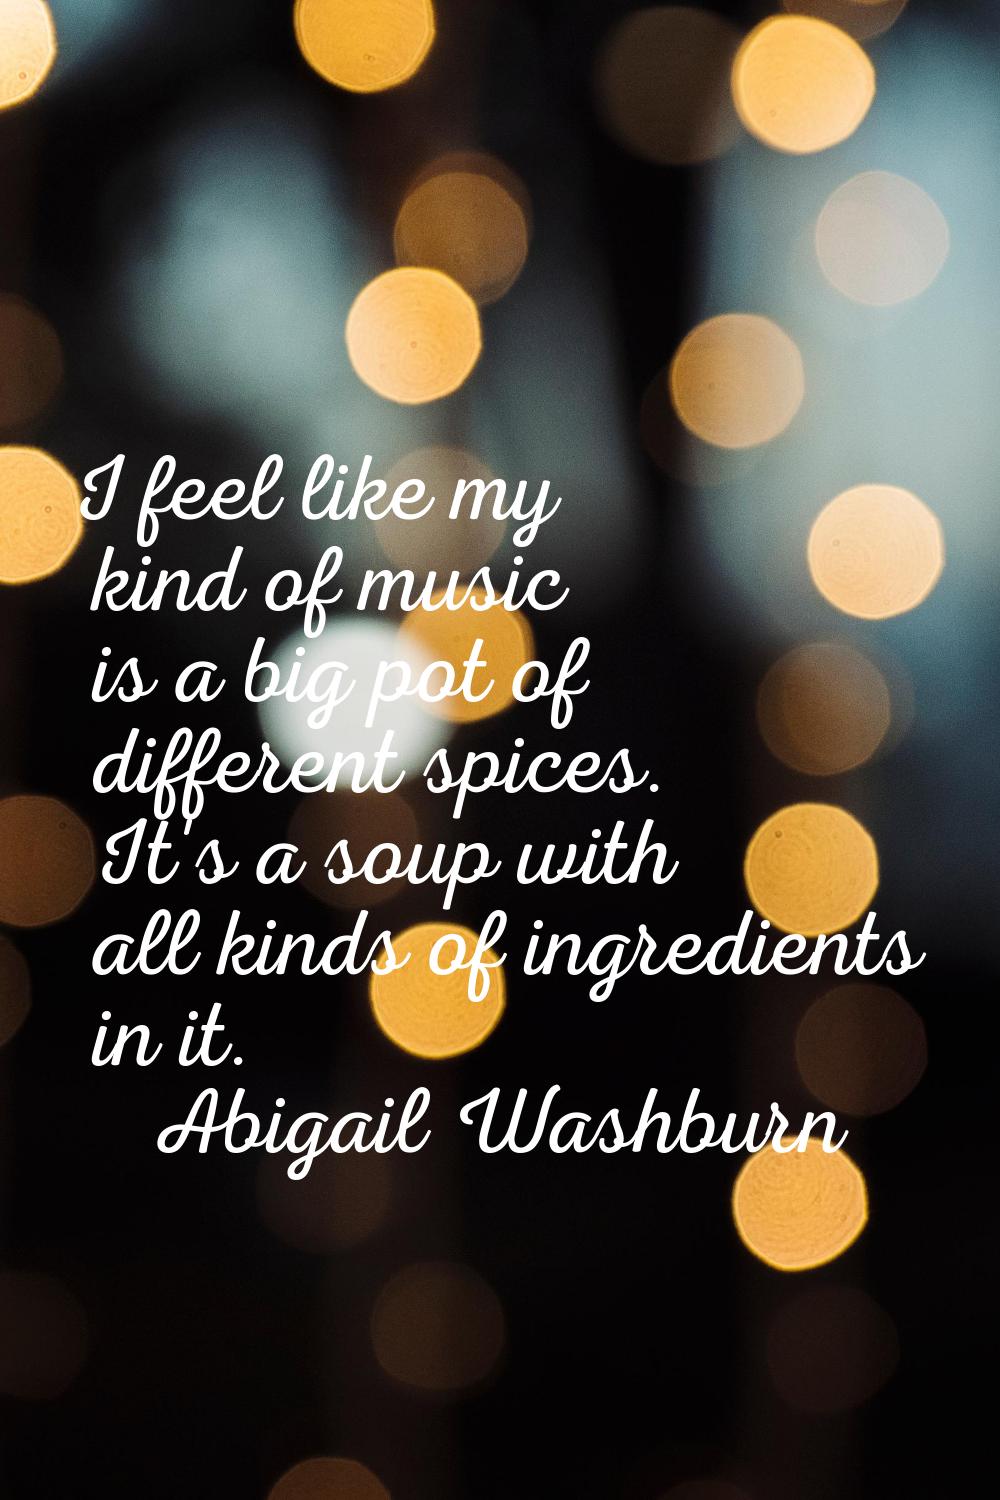 I feel like my kind of music is a big pot of different spices. It's a soup with all kinds of ingred